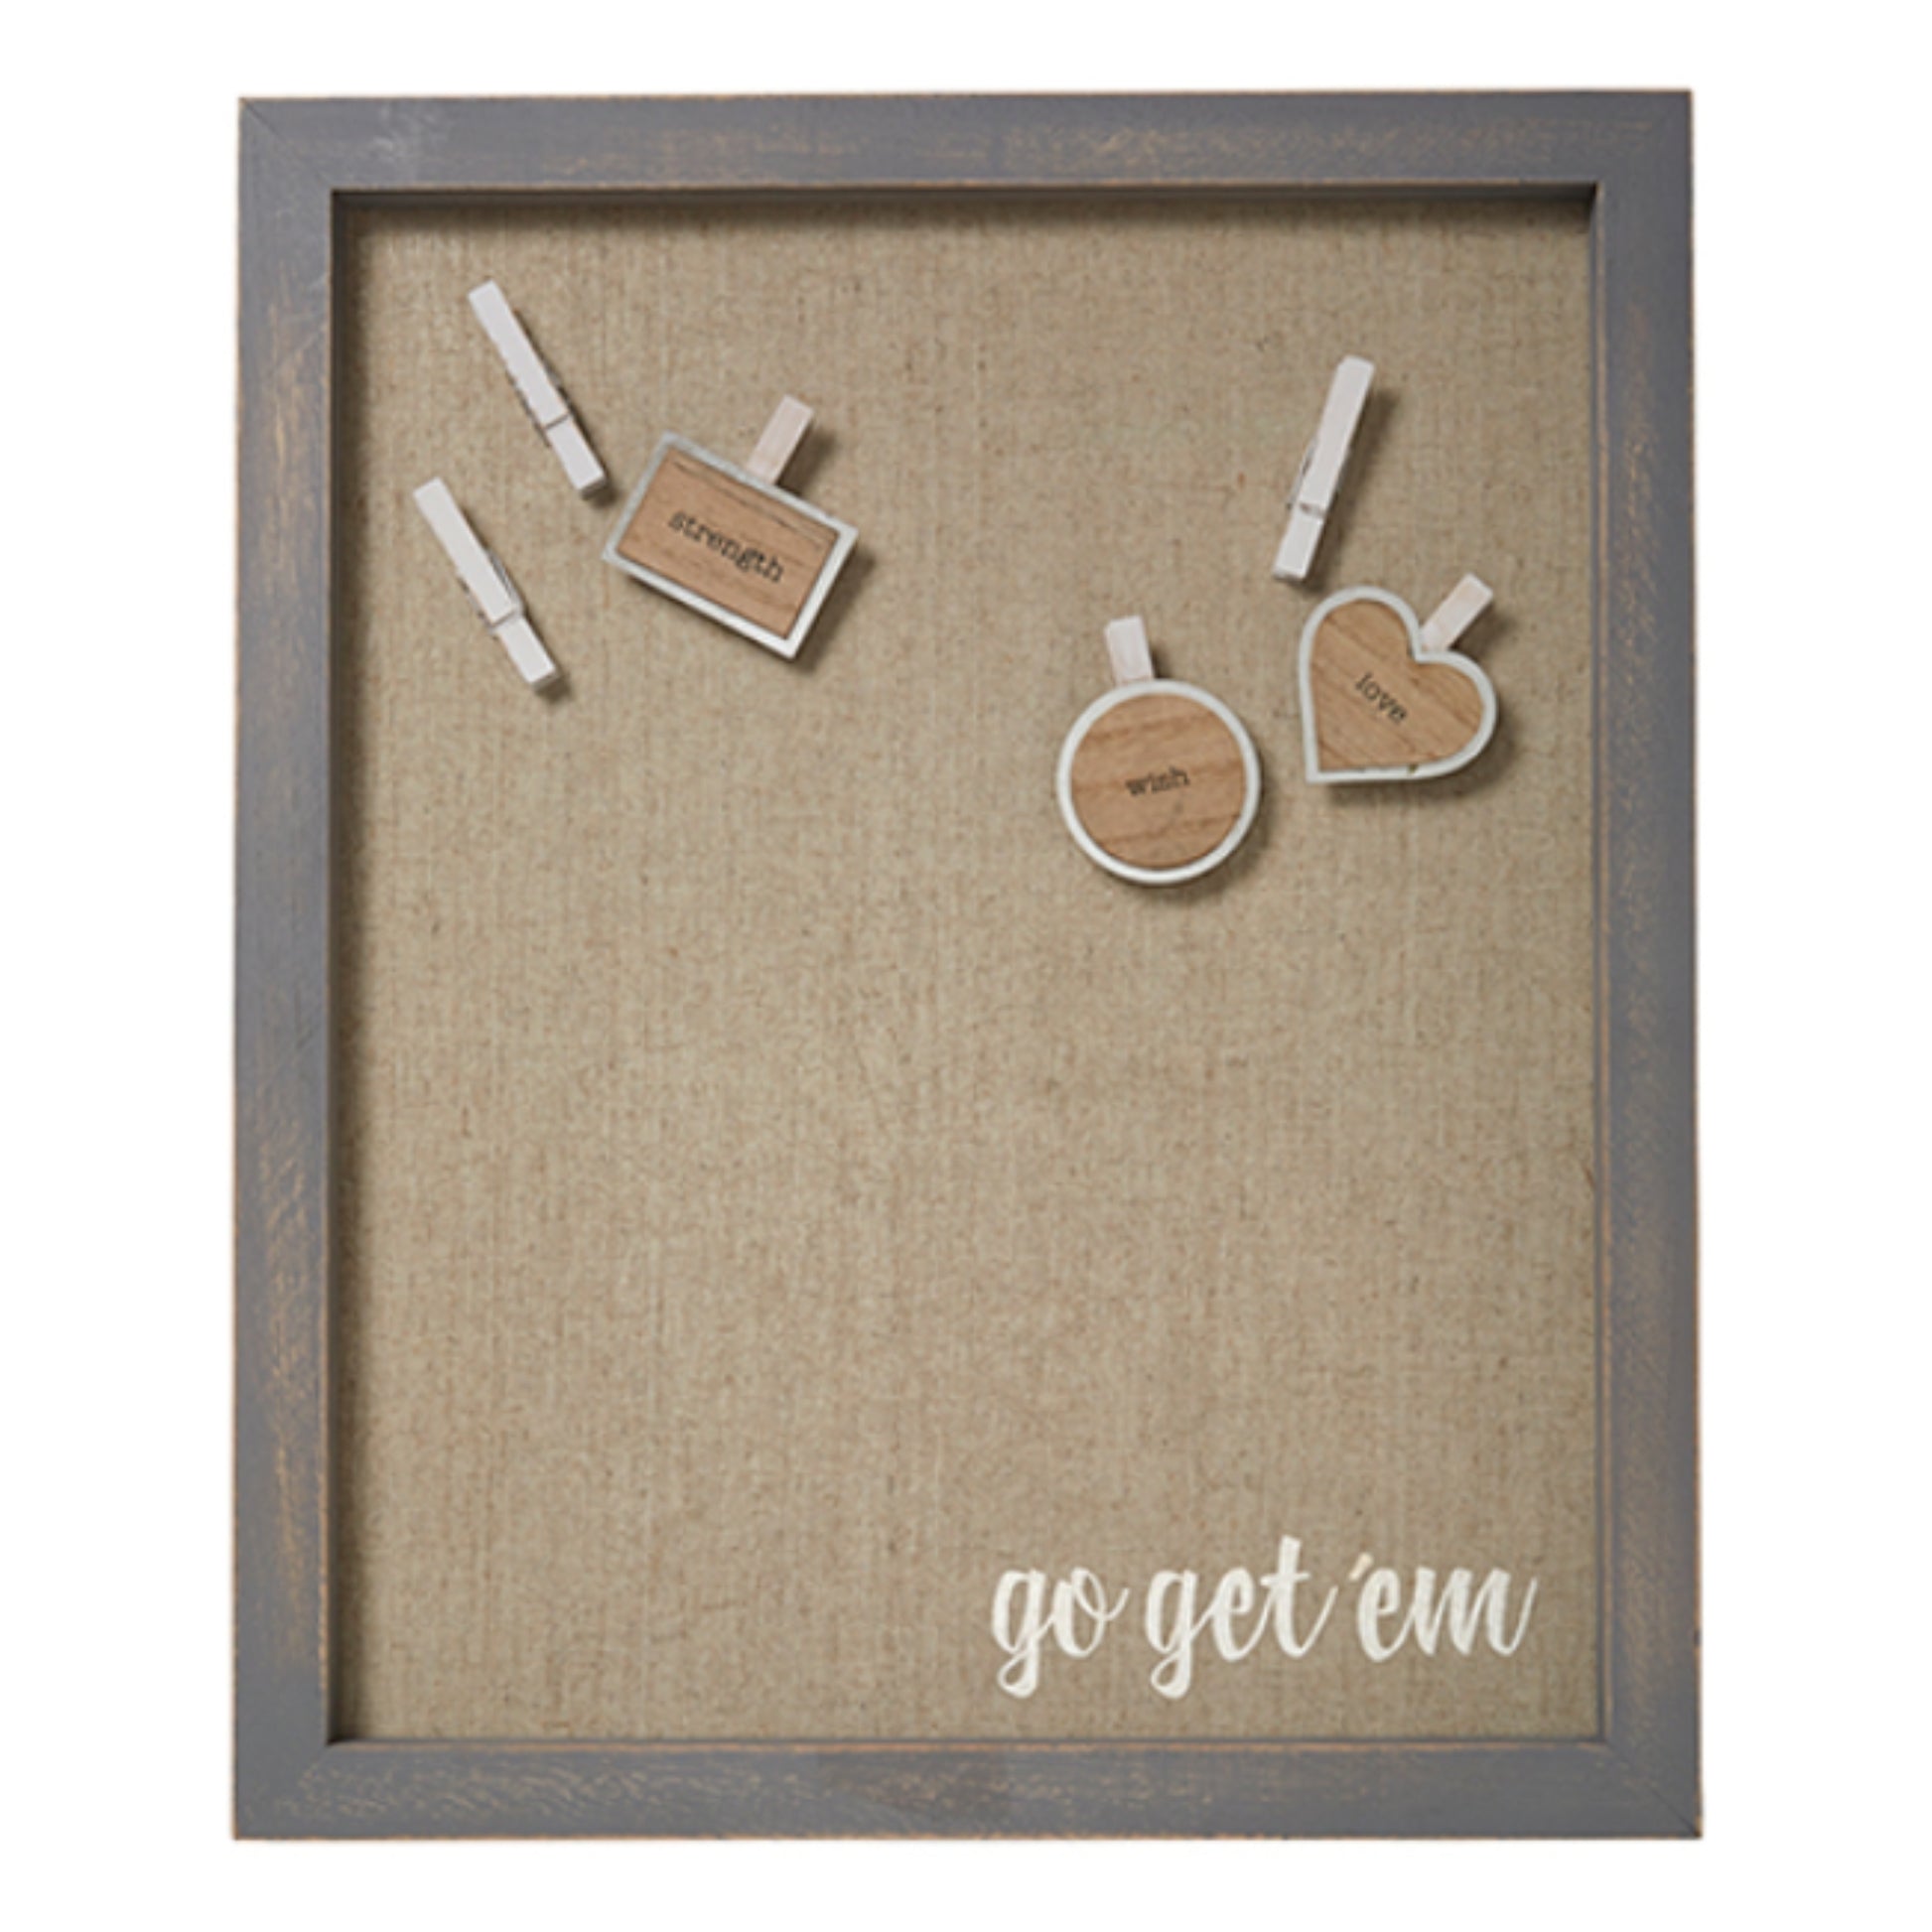 Go Get 'Em Home Office Magnetic Board - Fabric Framed Functional Wall Art (15x18) perfect for kitchen organization or home office | oak7west.com